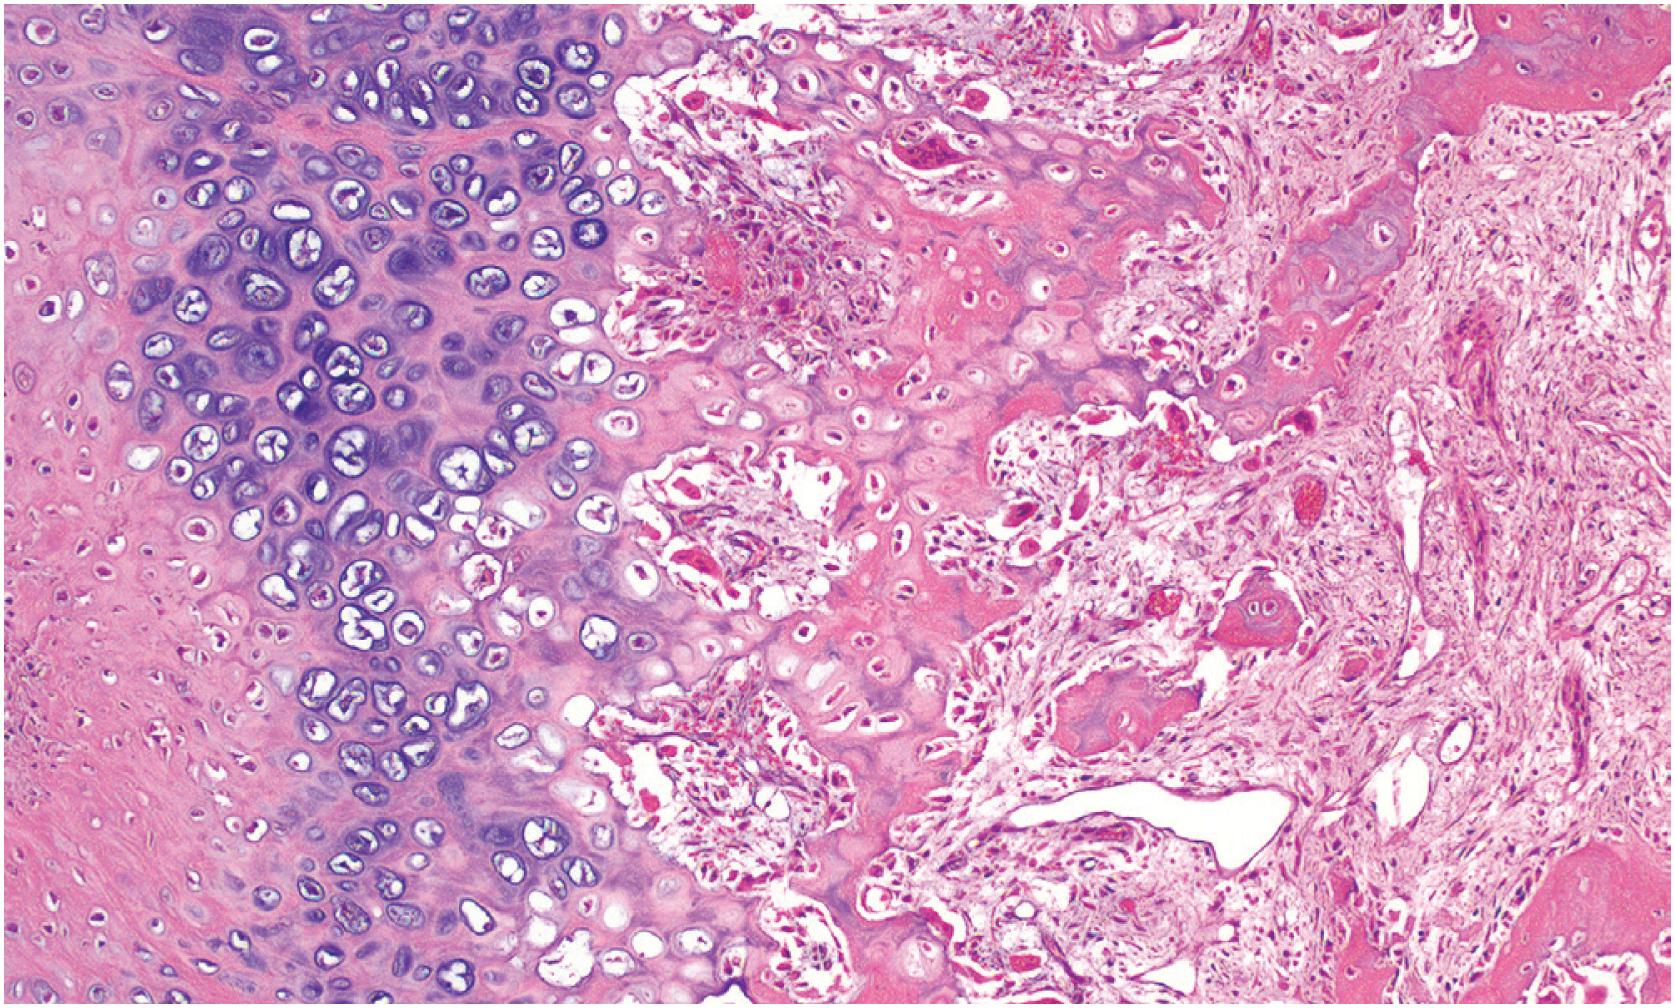 Fig. 17.20, Histologically bizarre parosteal osteochondromatous proliferation (BPOP) shows hypercellular hyaline cartilage undergoing endochondral ossification and a transition to woven bone. The mineralization has a basophilic appearance.